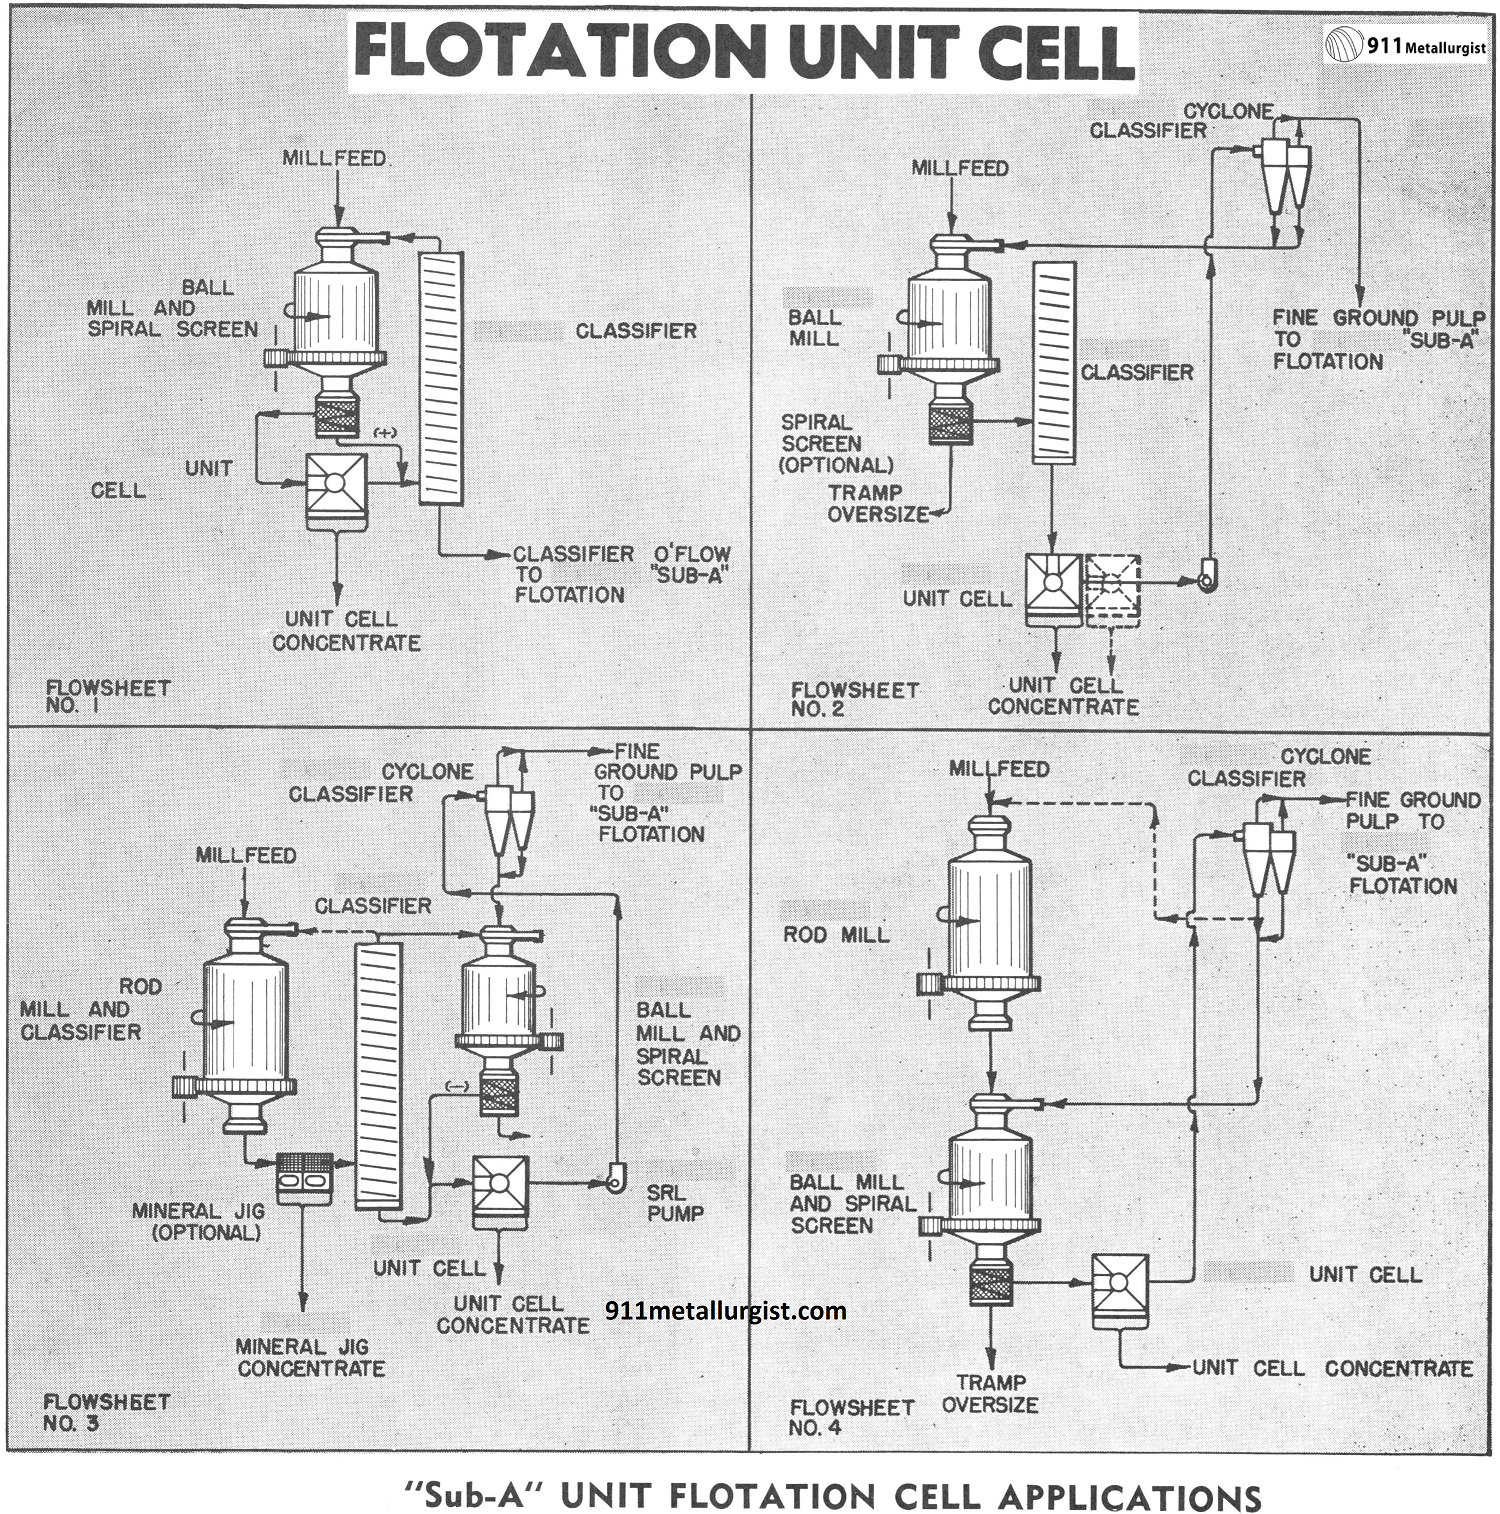 Flash Flotation with Closed Circuit Grinding